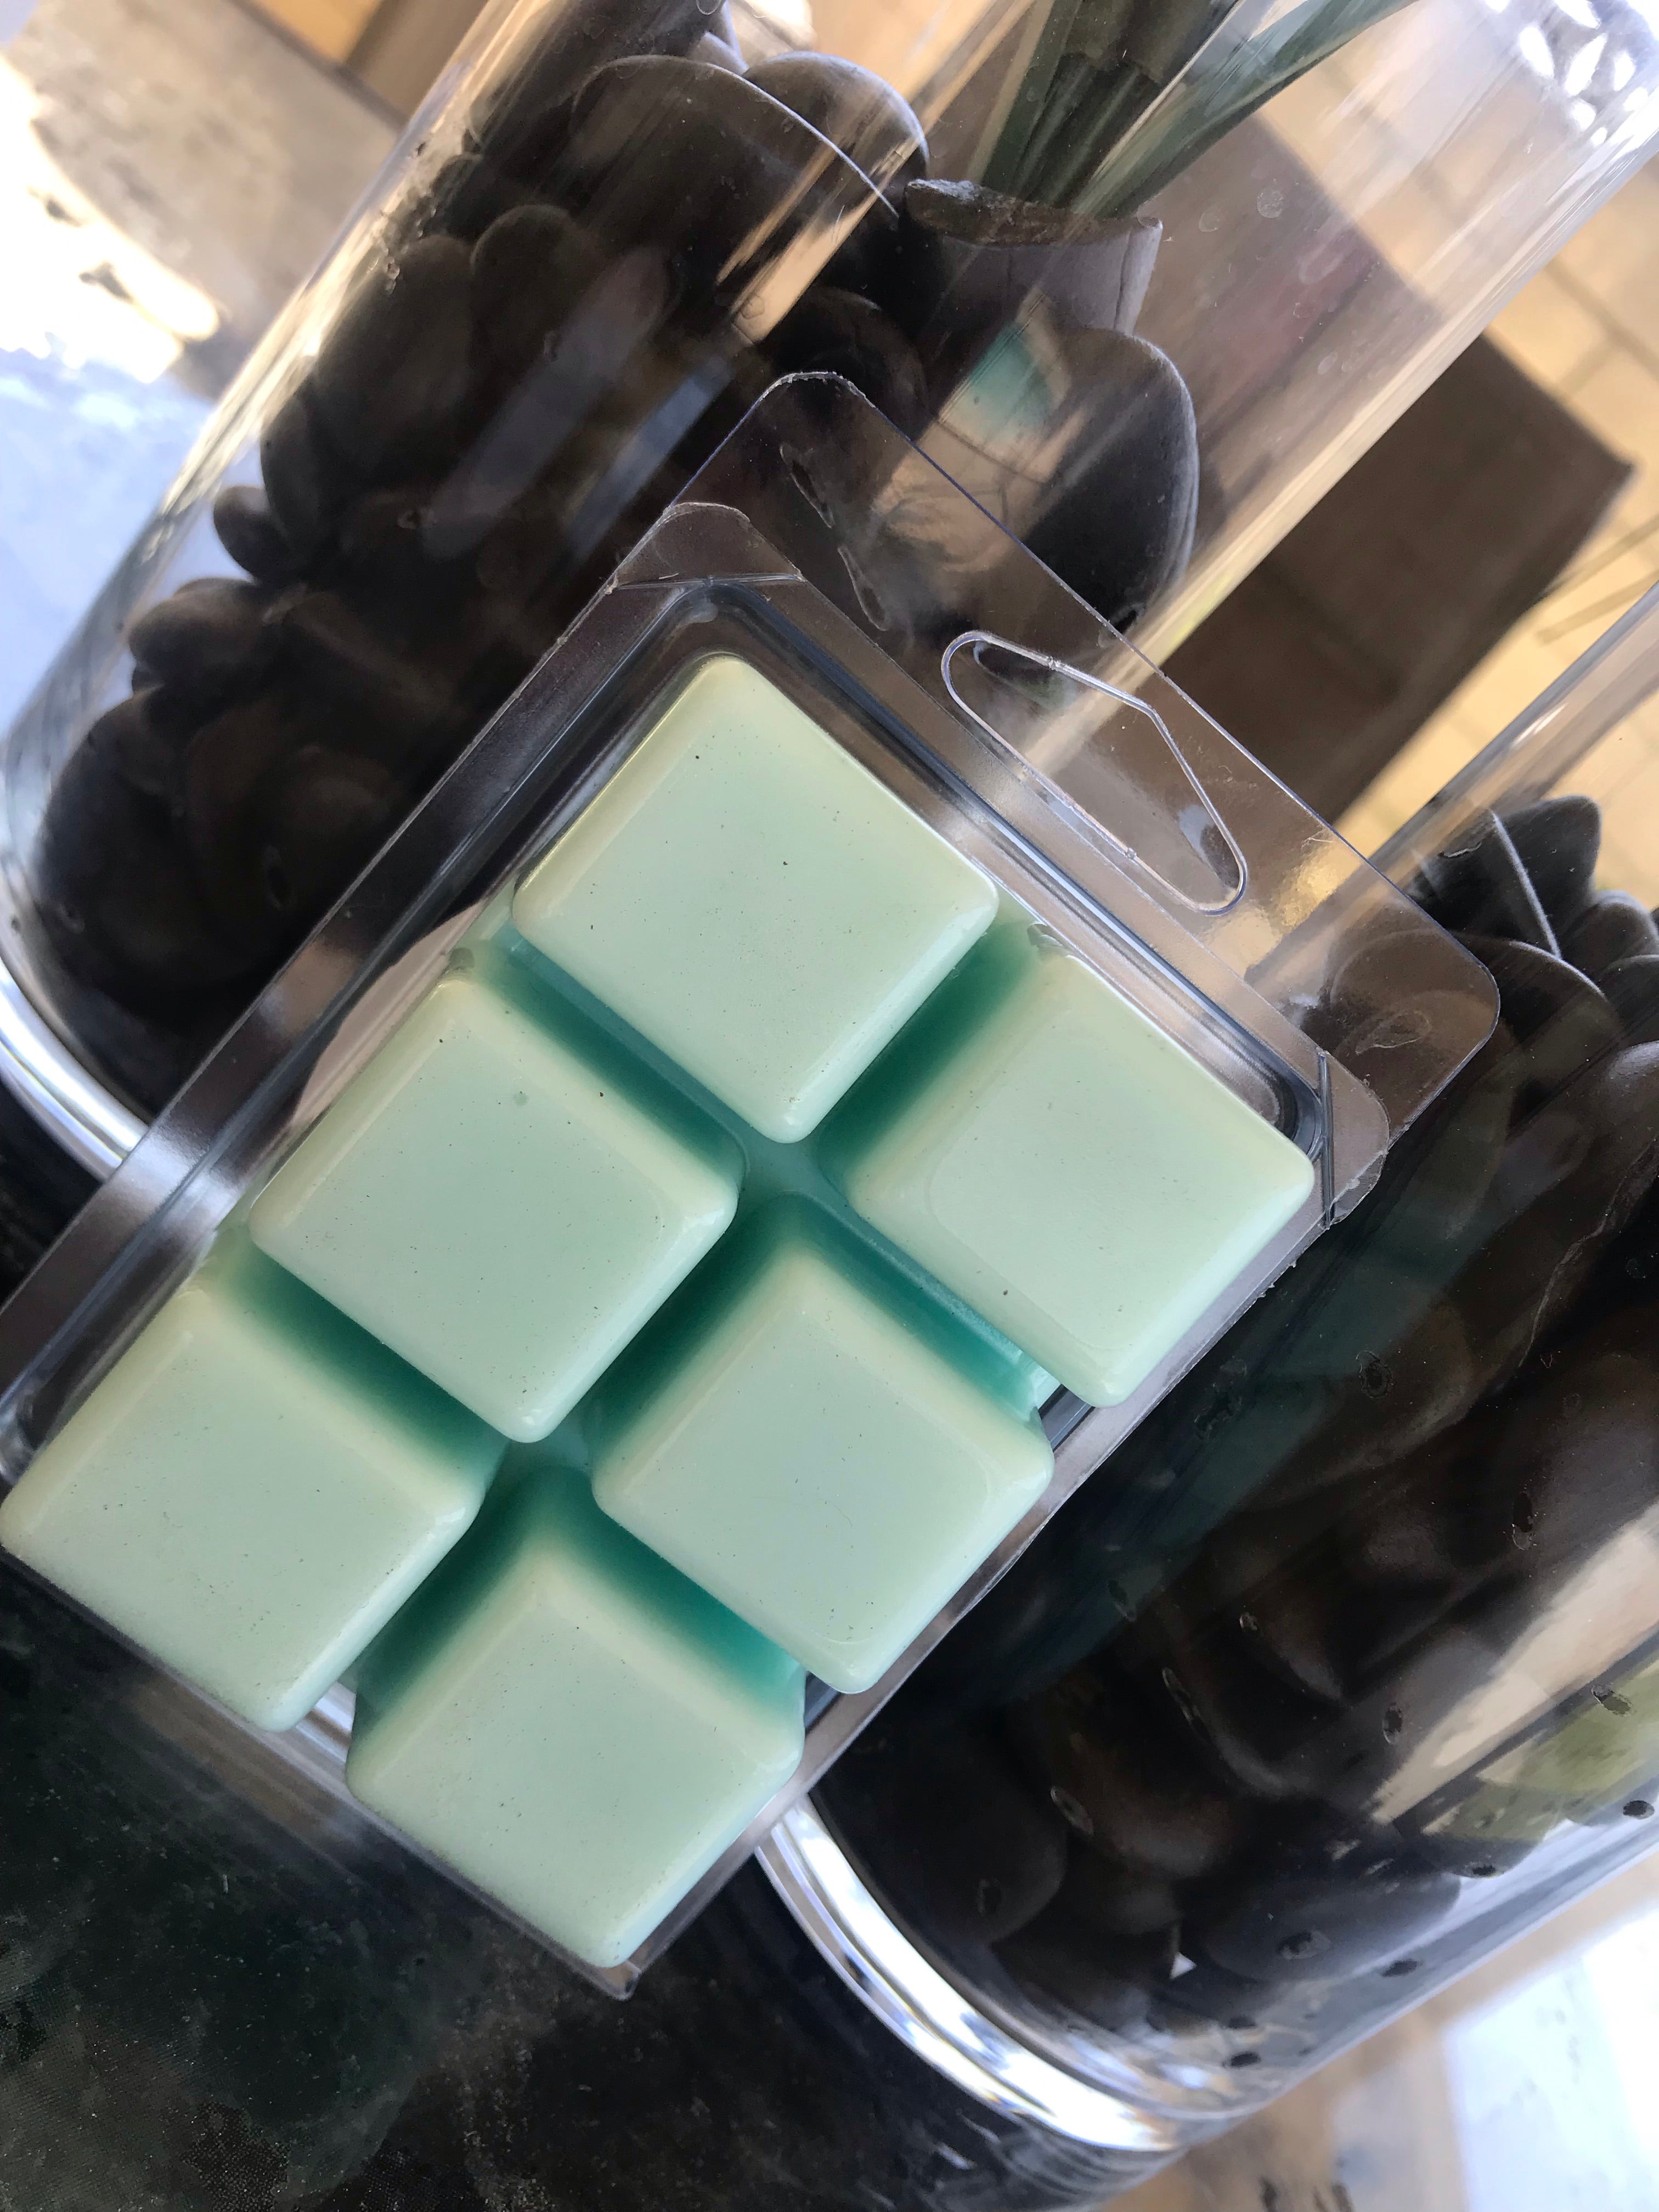 Wax and Oils Soy Wax Aromatherapy Scented Candles (Spa Day Wax Melts) 2.36 Ounces. Single